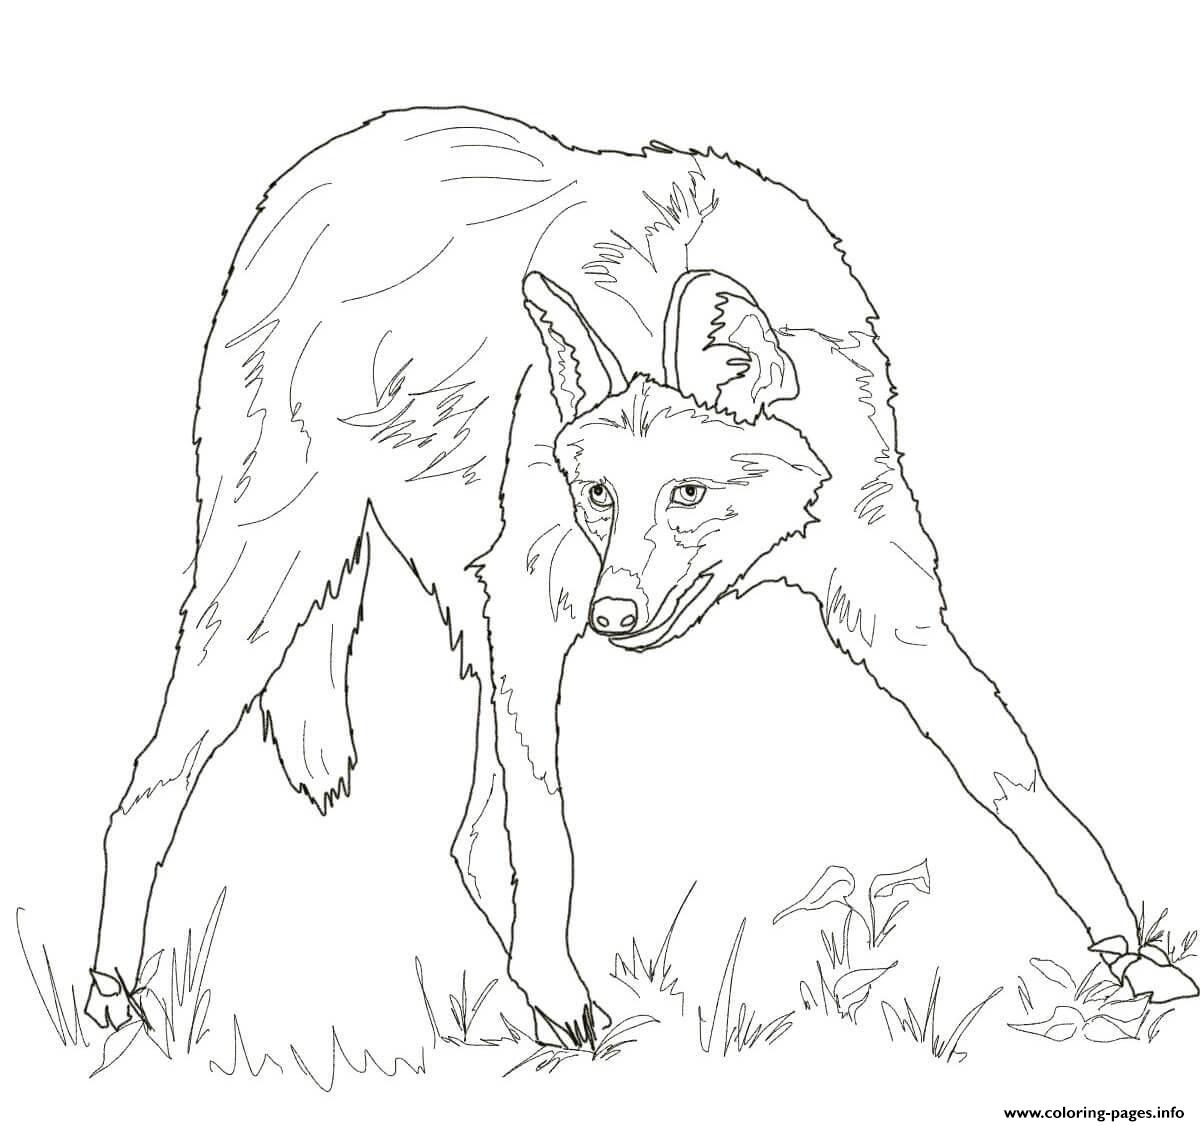 Maned Wolf coloring